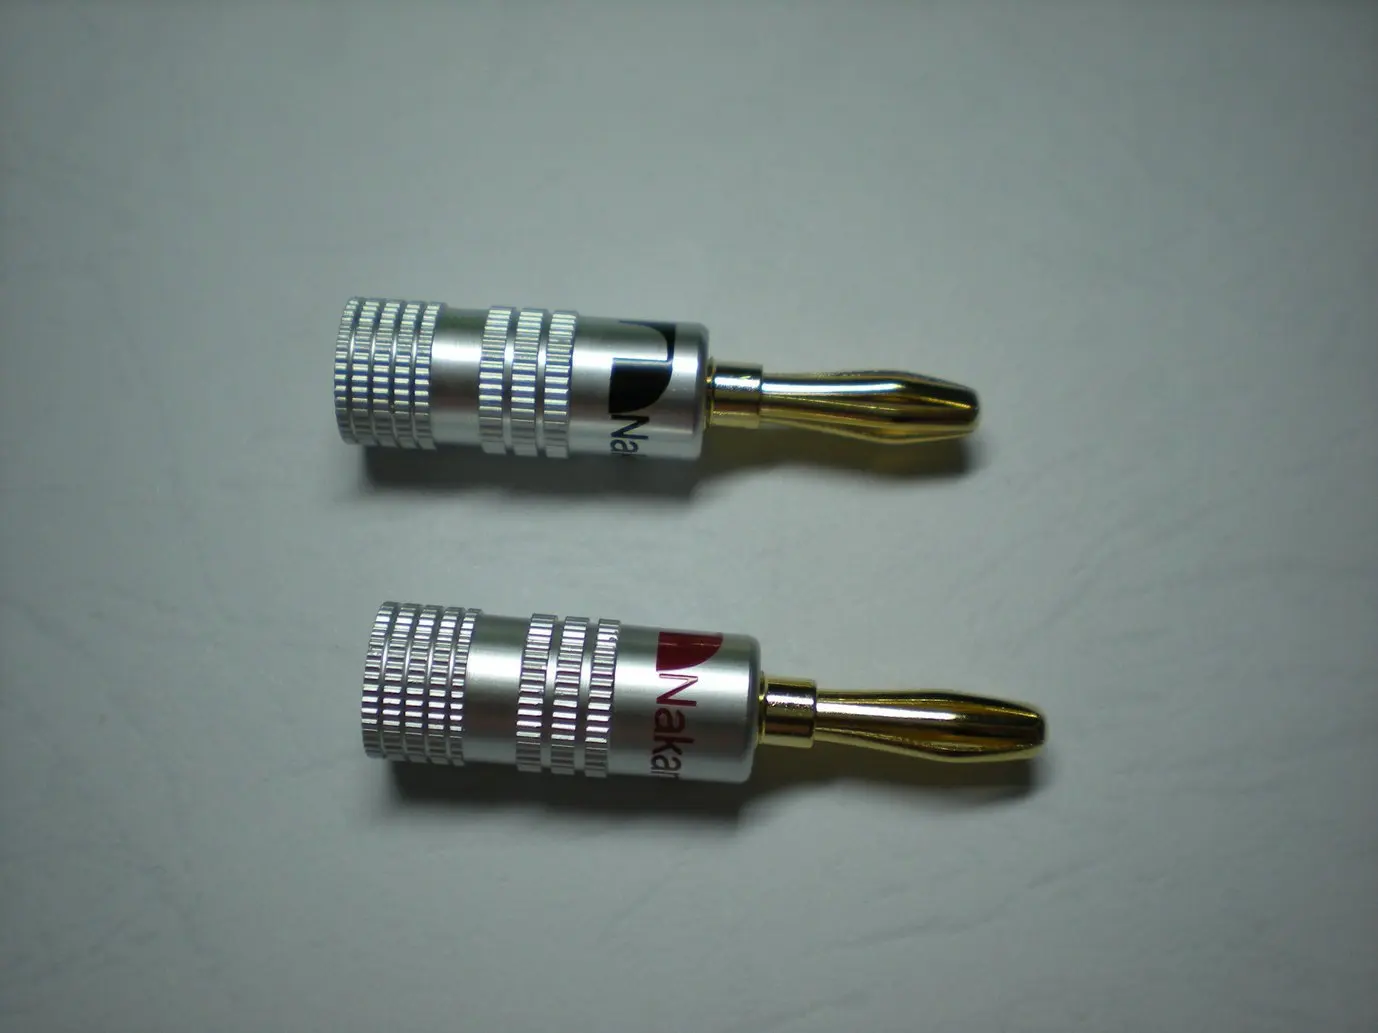 Nakamichi Banana Plug Gold Plated Speaker Connector Red and Black Color -2.jpg